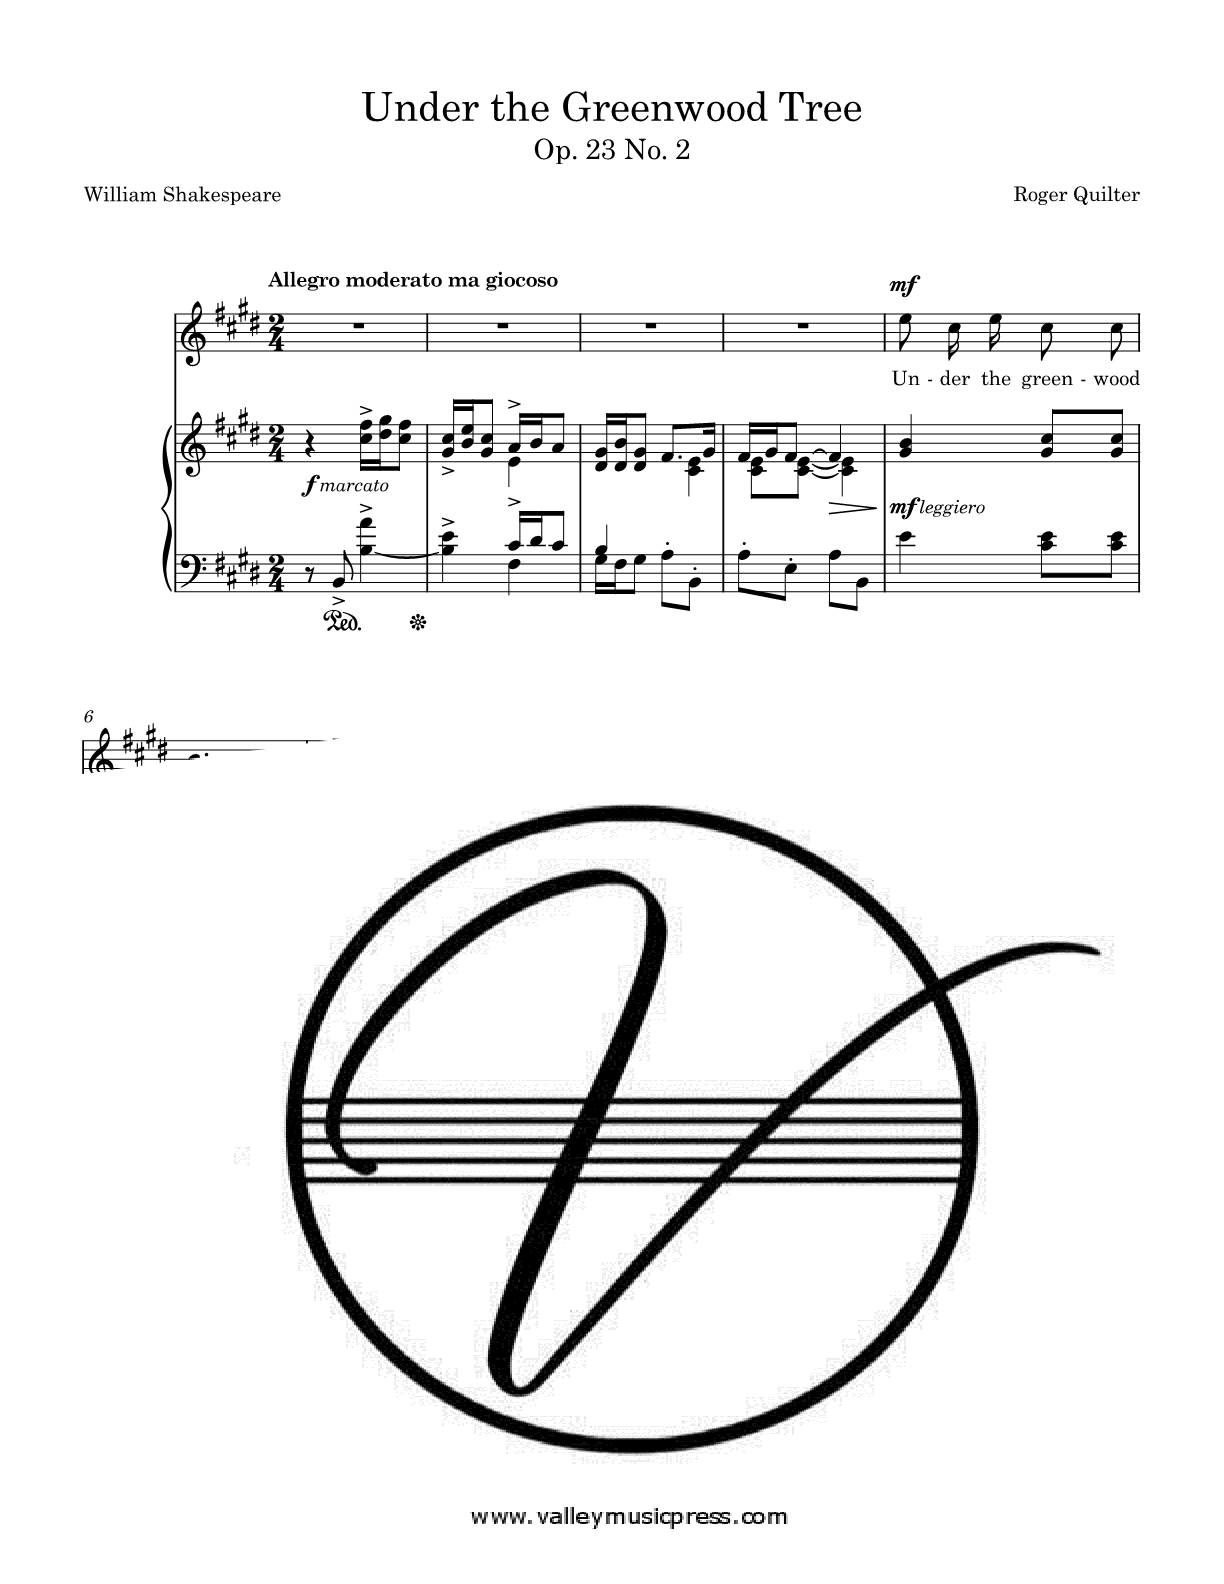 Quilter - Under the Greenwood Tree Op. 23 No. 2 (Voice) - Click Image to Close